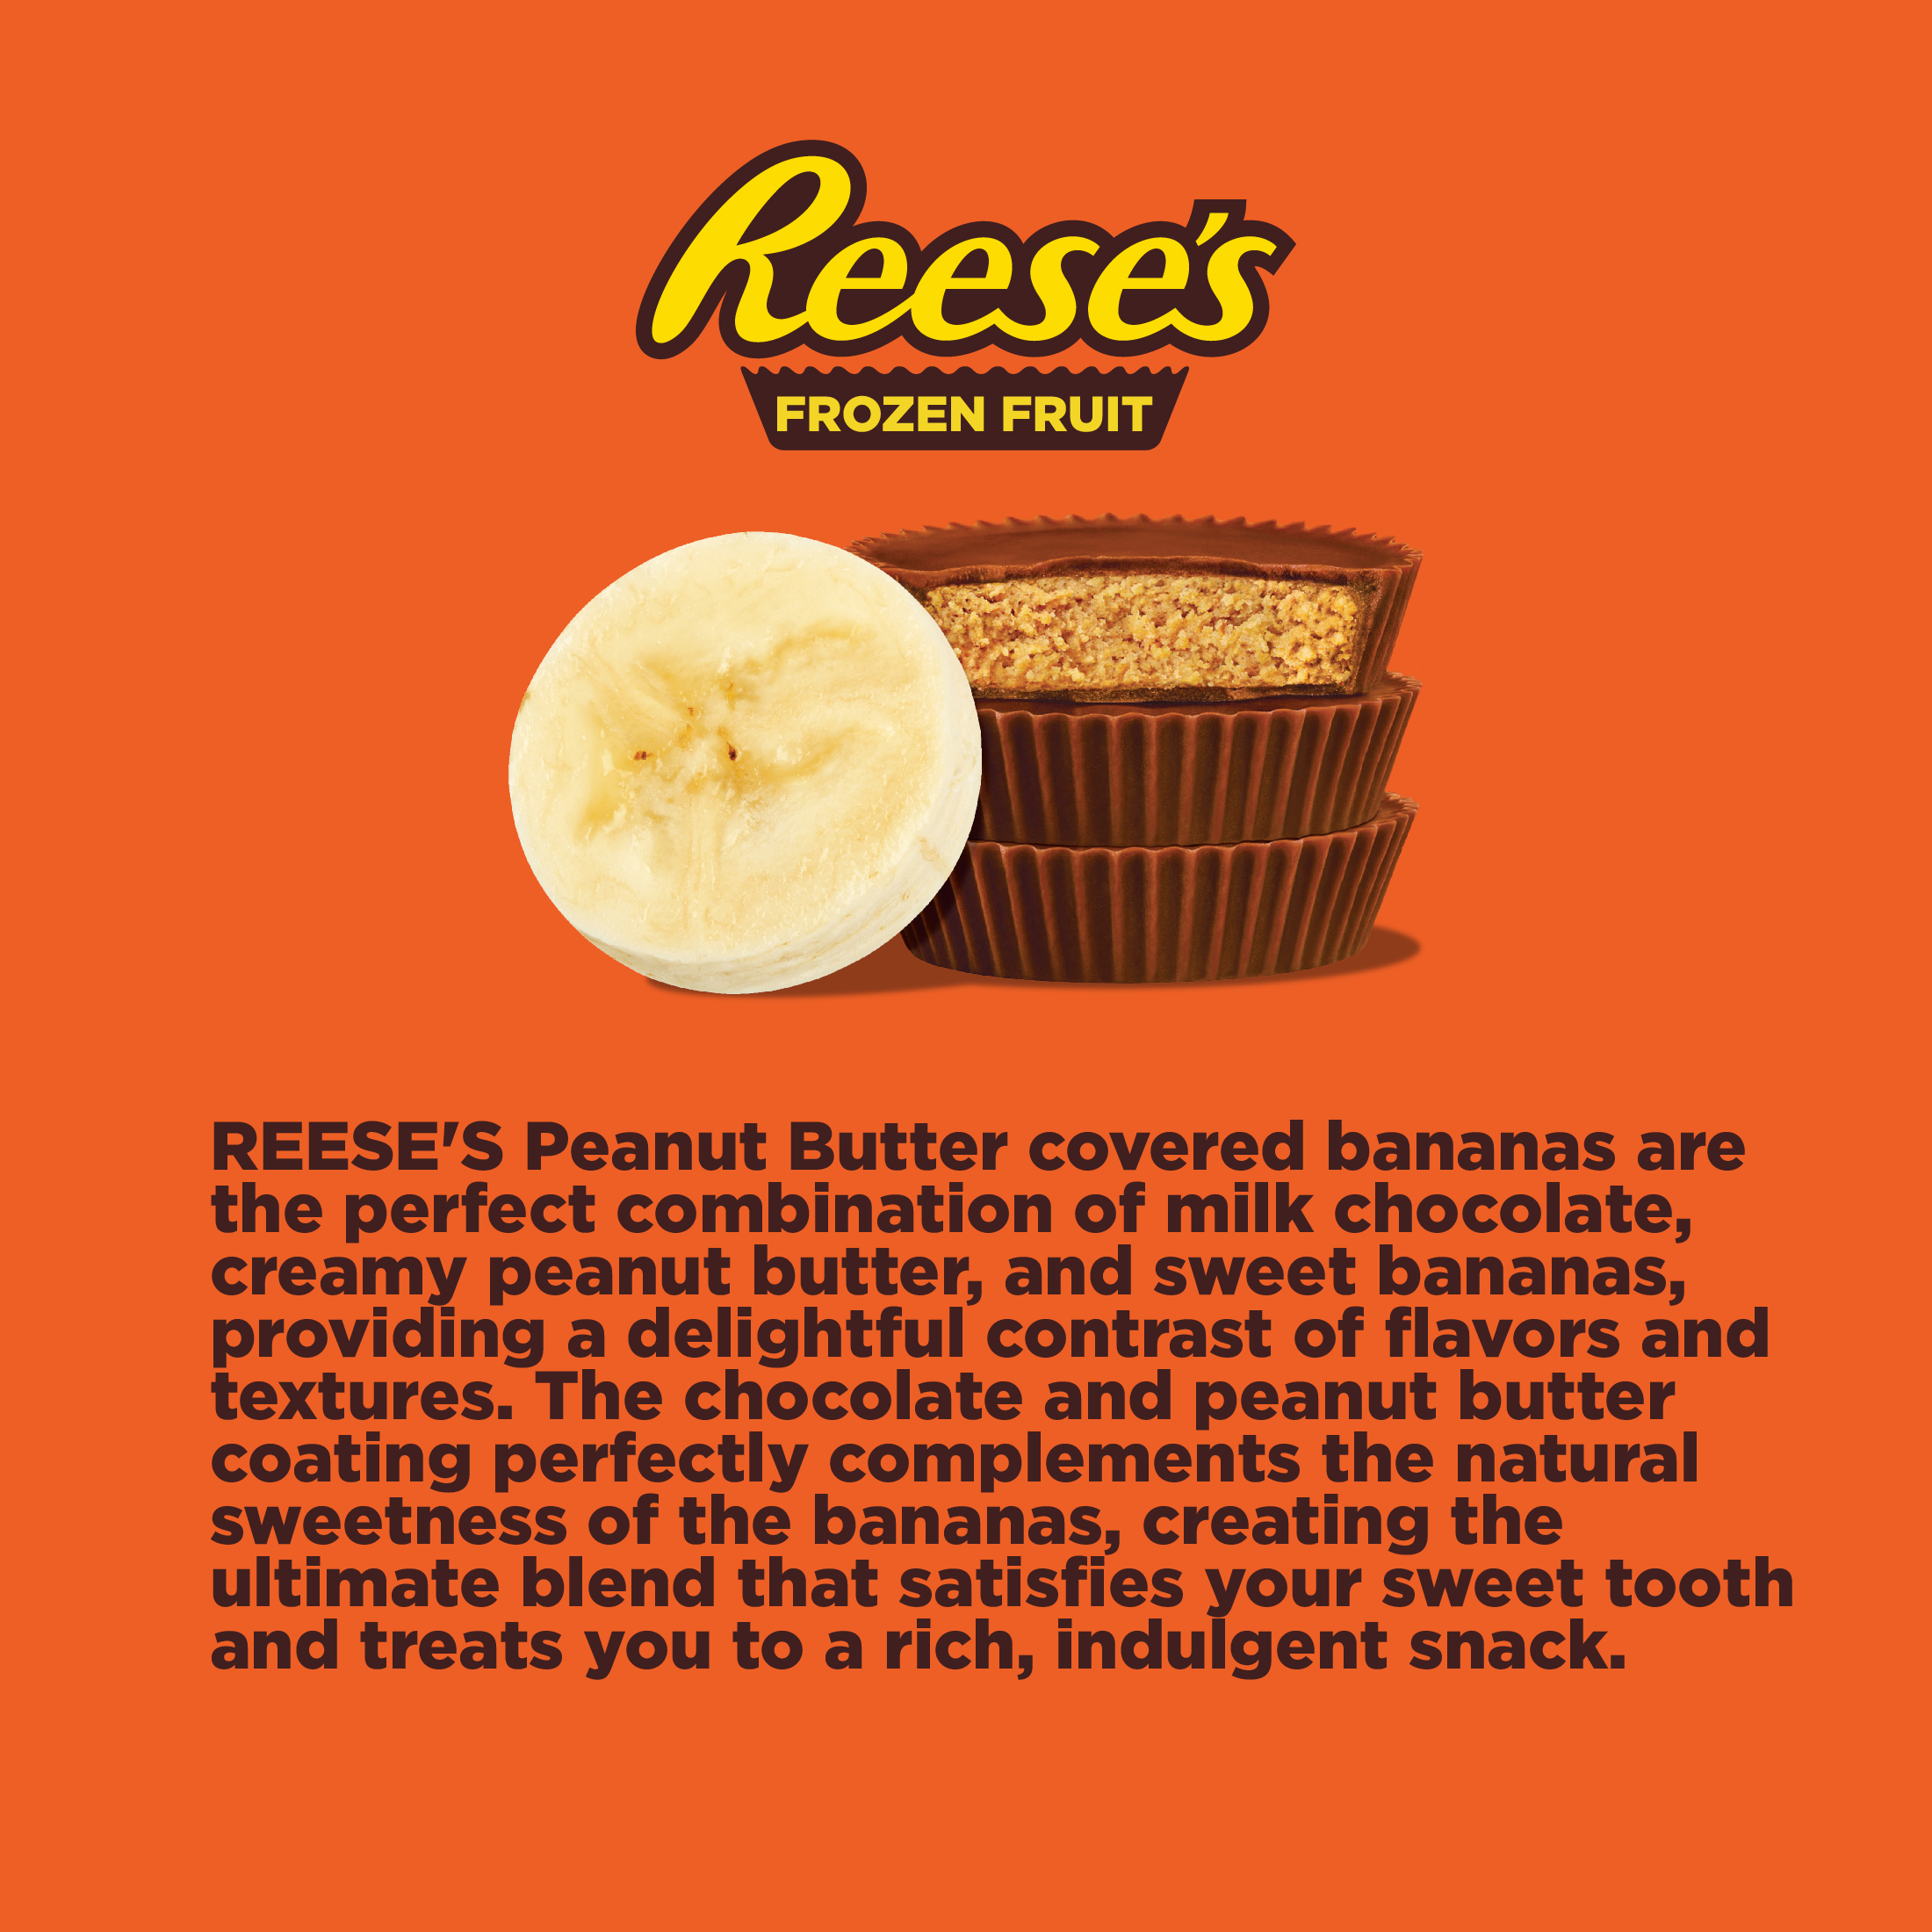 Reese’s Banana Slices in Milk Chocolate and Reese's Peanut Butter Chips, 8 oz (Frozen) - image 3 of 5